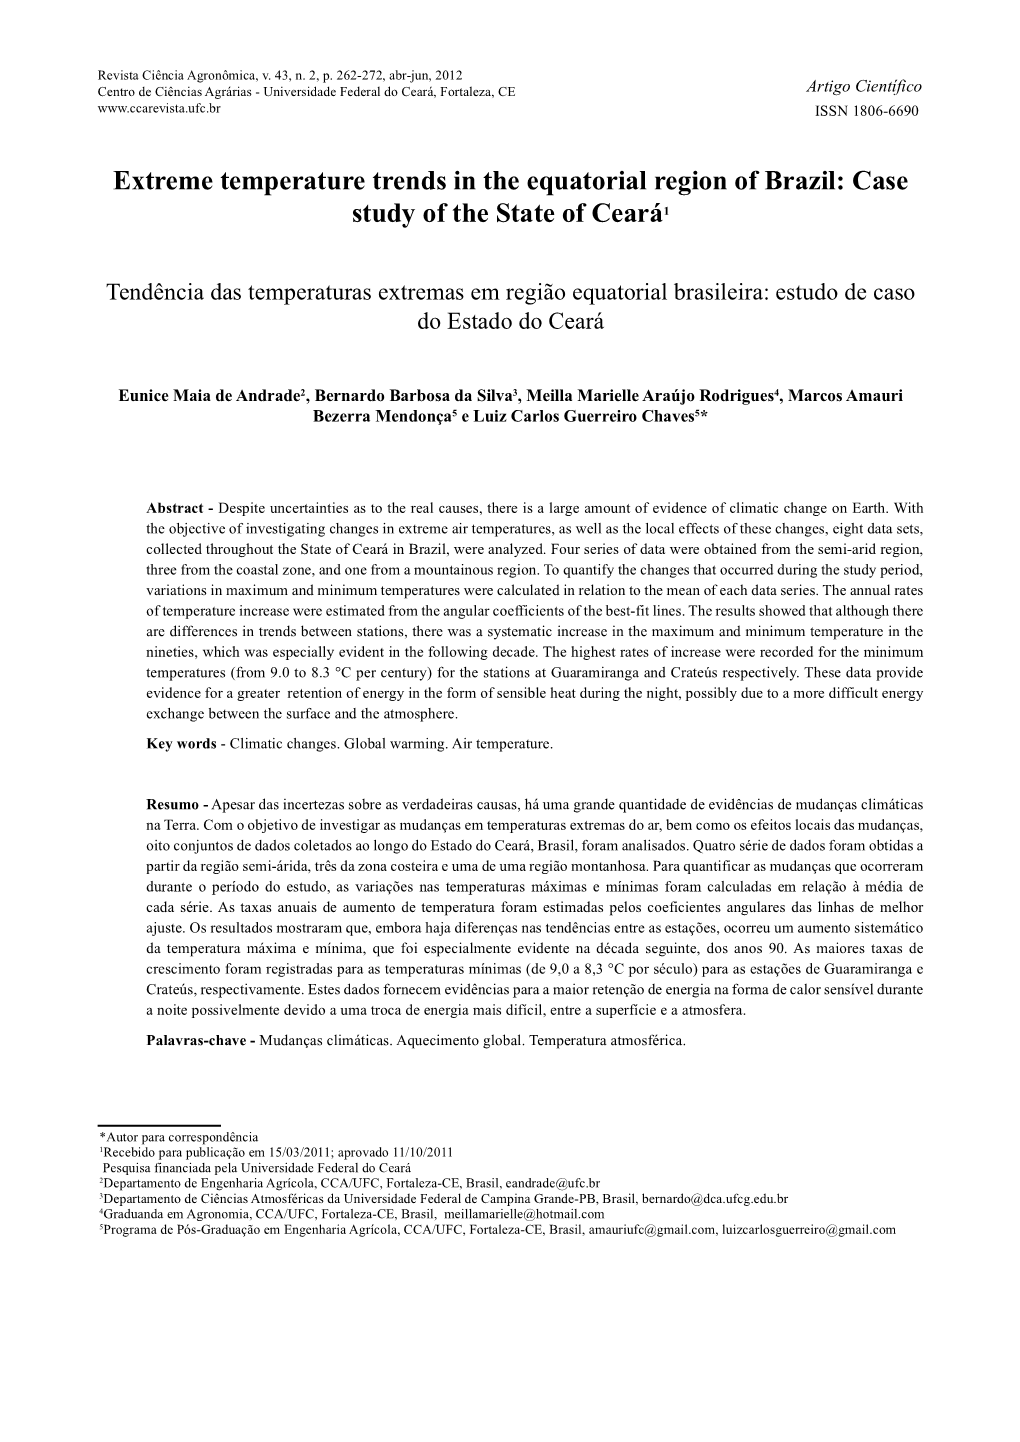 Extreme Temperature Trends in the Equatorial Region of Brazil: Case Study of the State of Ceará1